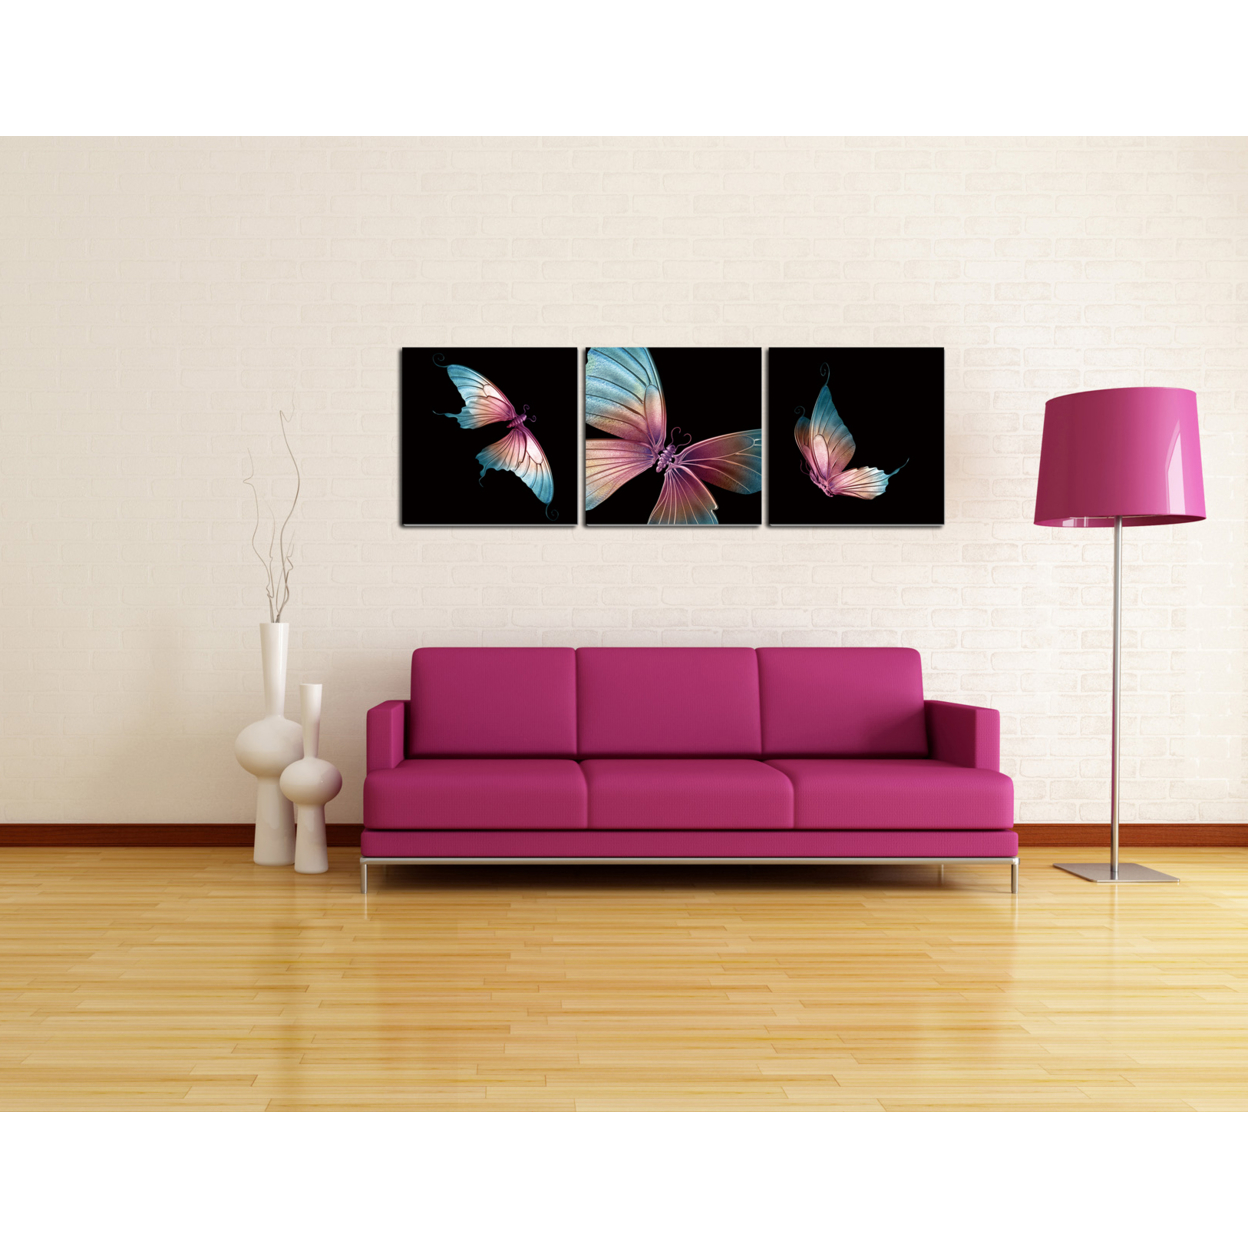 Butterfly 3 Piece Wrapped Canvas Wall Art Print 16x48 Inches